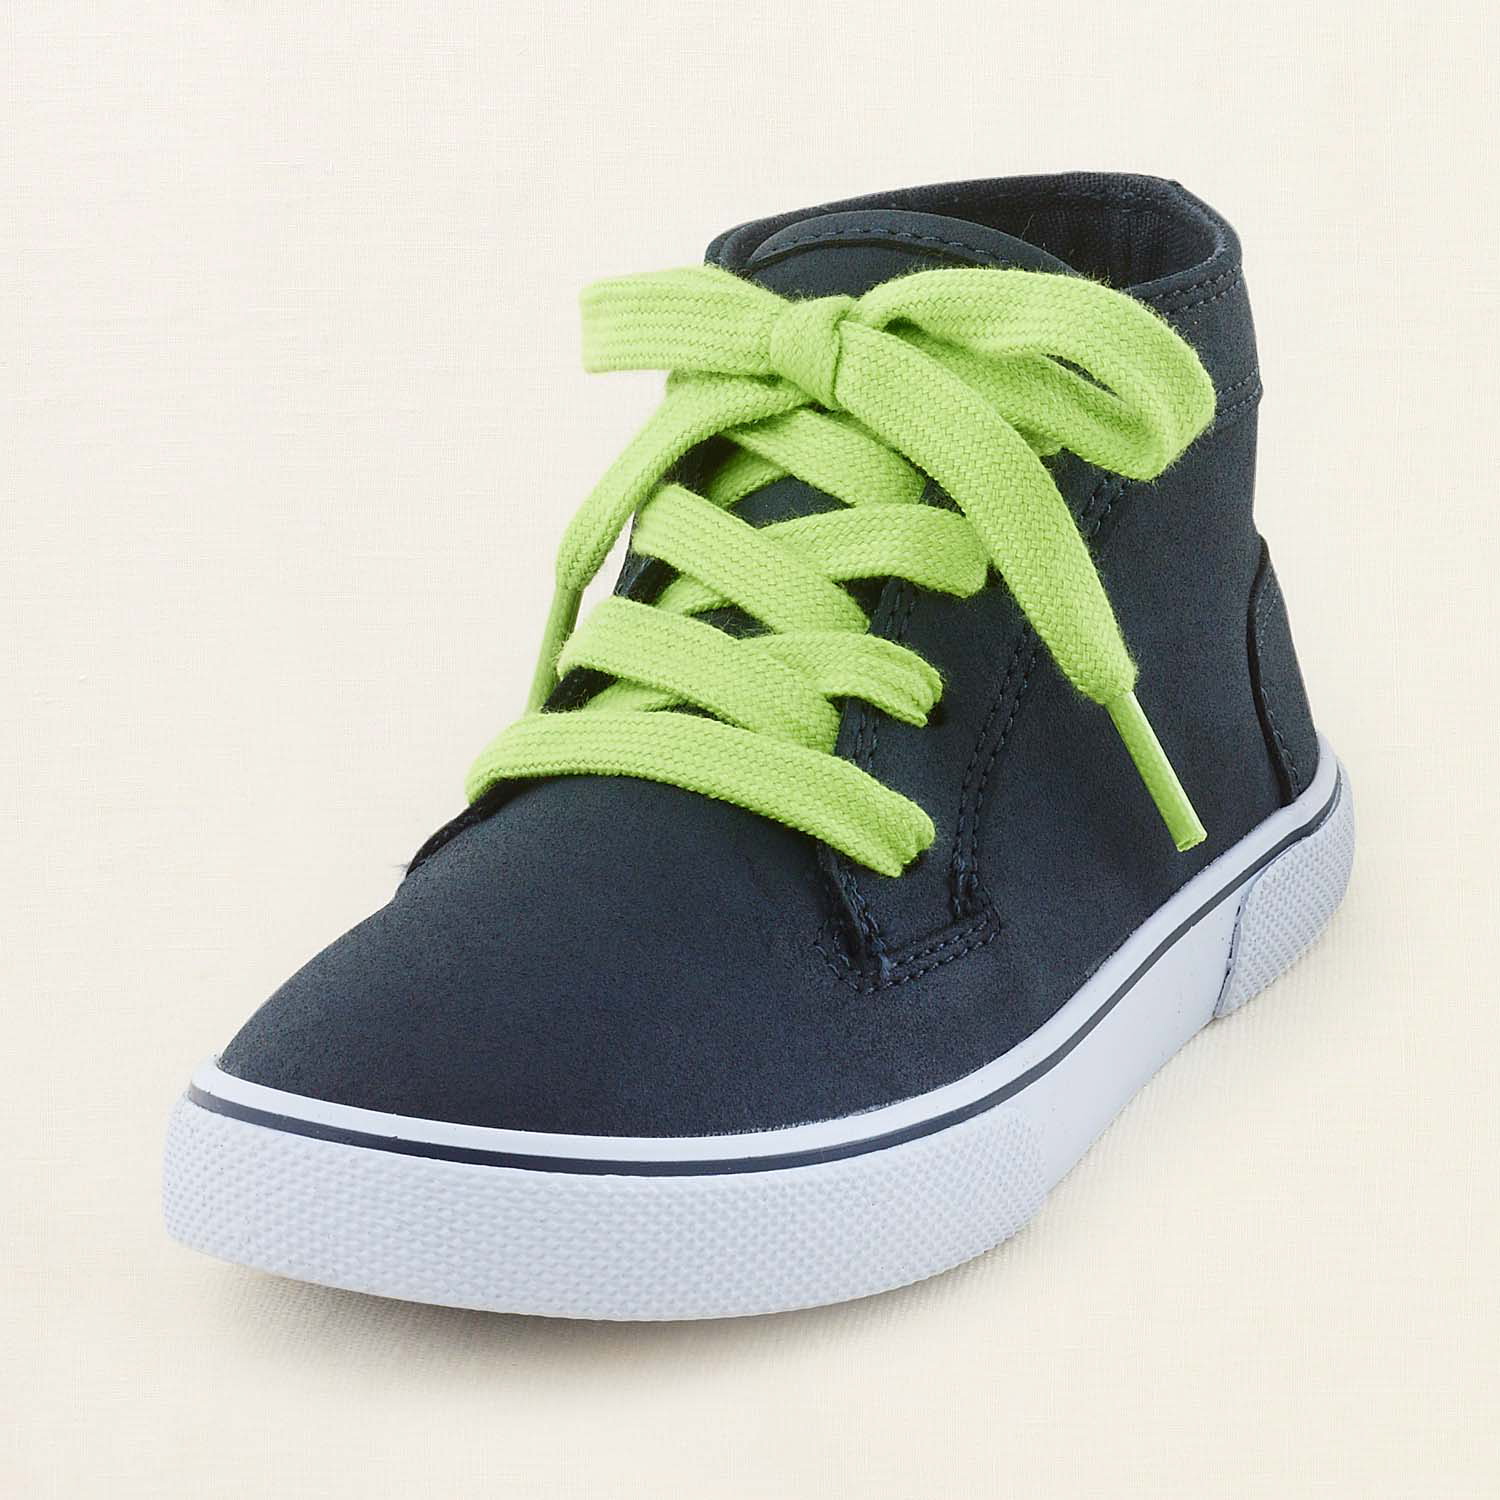 The Children's Place
A camel sneaker with orange neon laces and a navy sneaker with green neon laces.